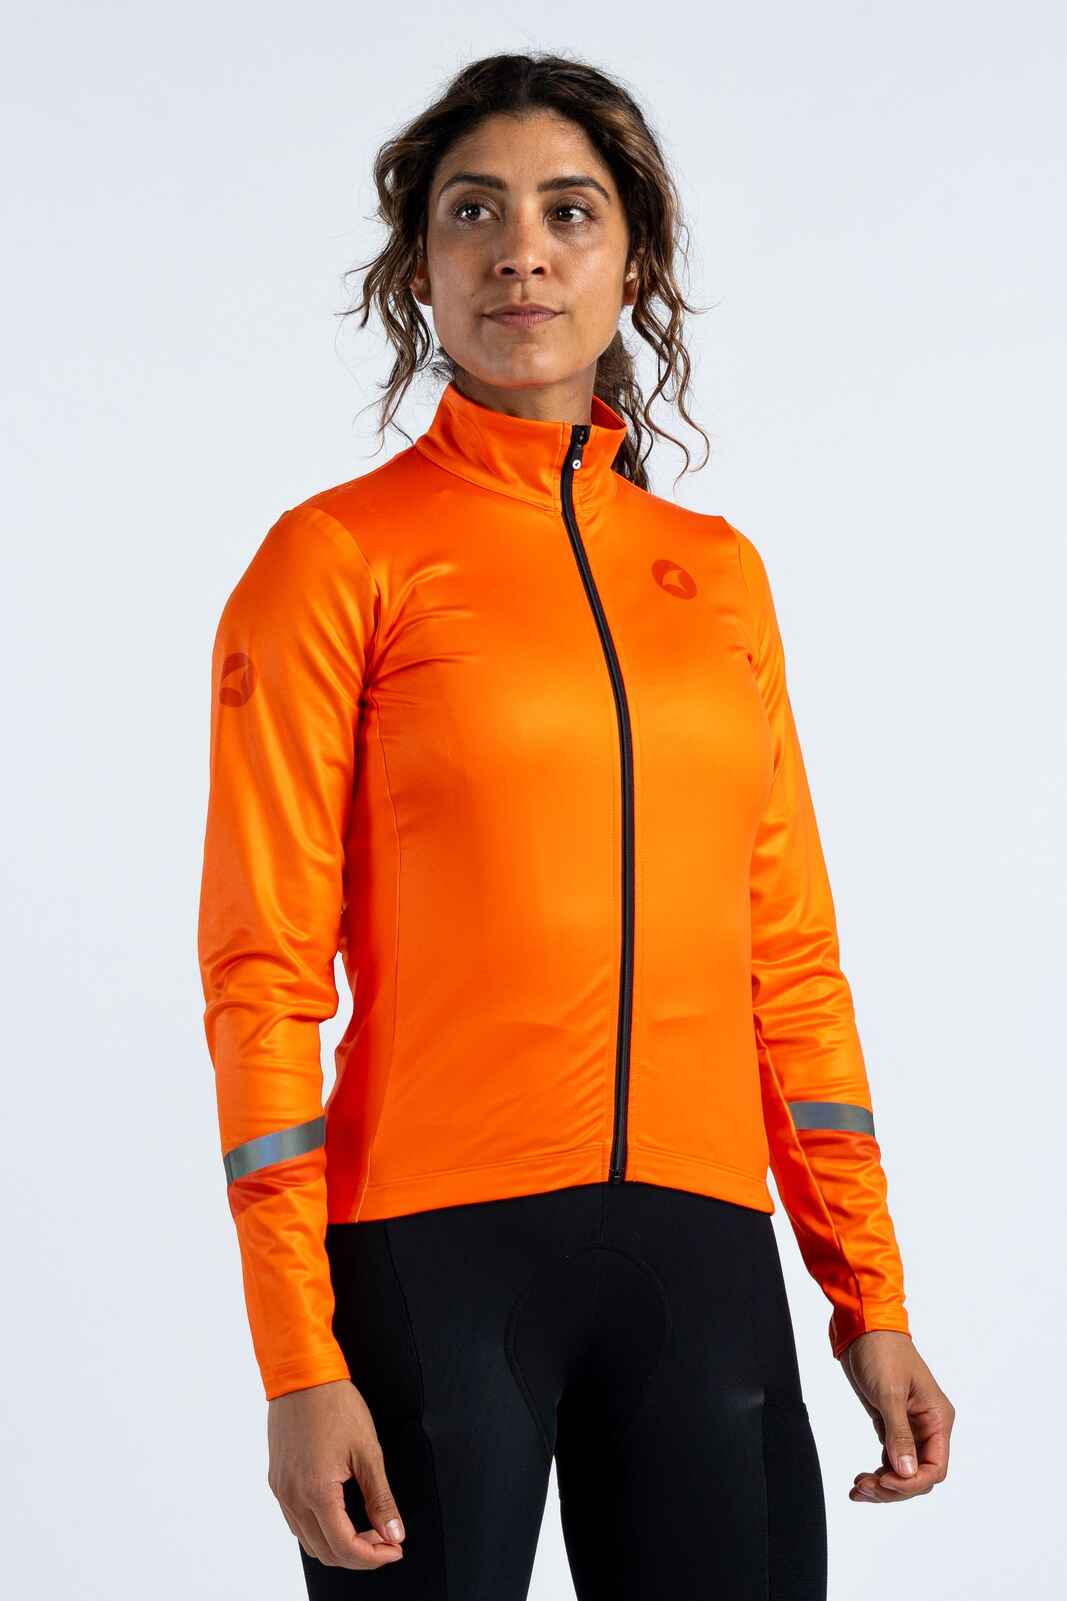 Women's Red/Orange Thermal Cycling Jersey - Front View